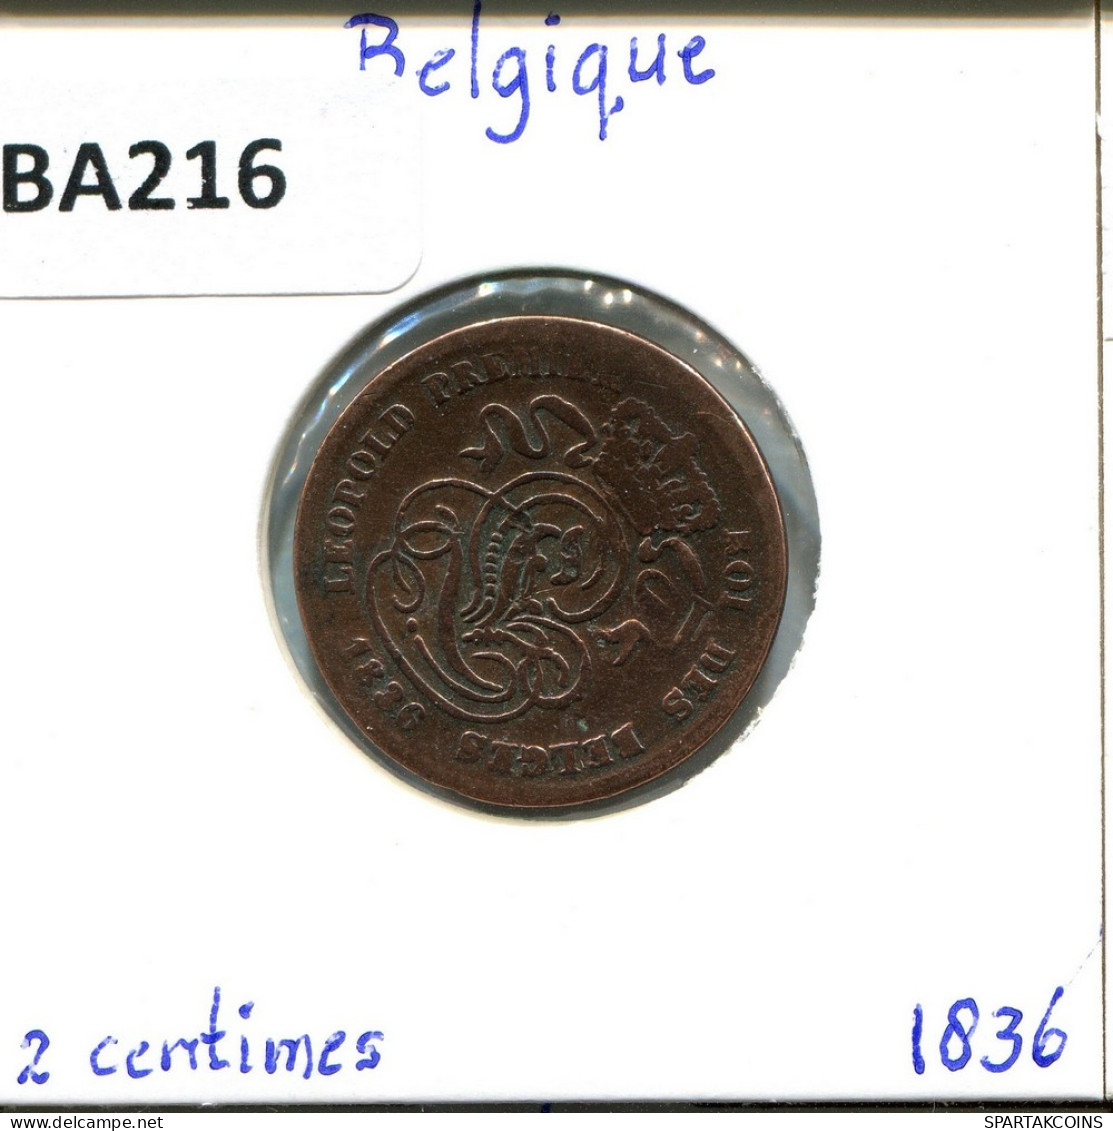 2 CENTIMES 1836 FRENCH Text BELGIUM Coin #BA216.U - 2 Centimes